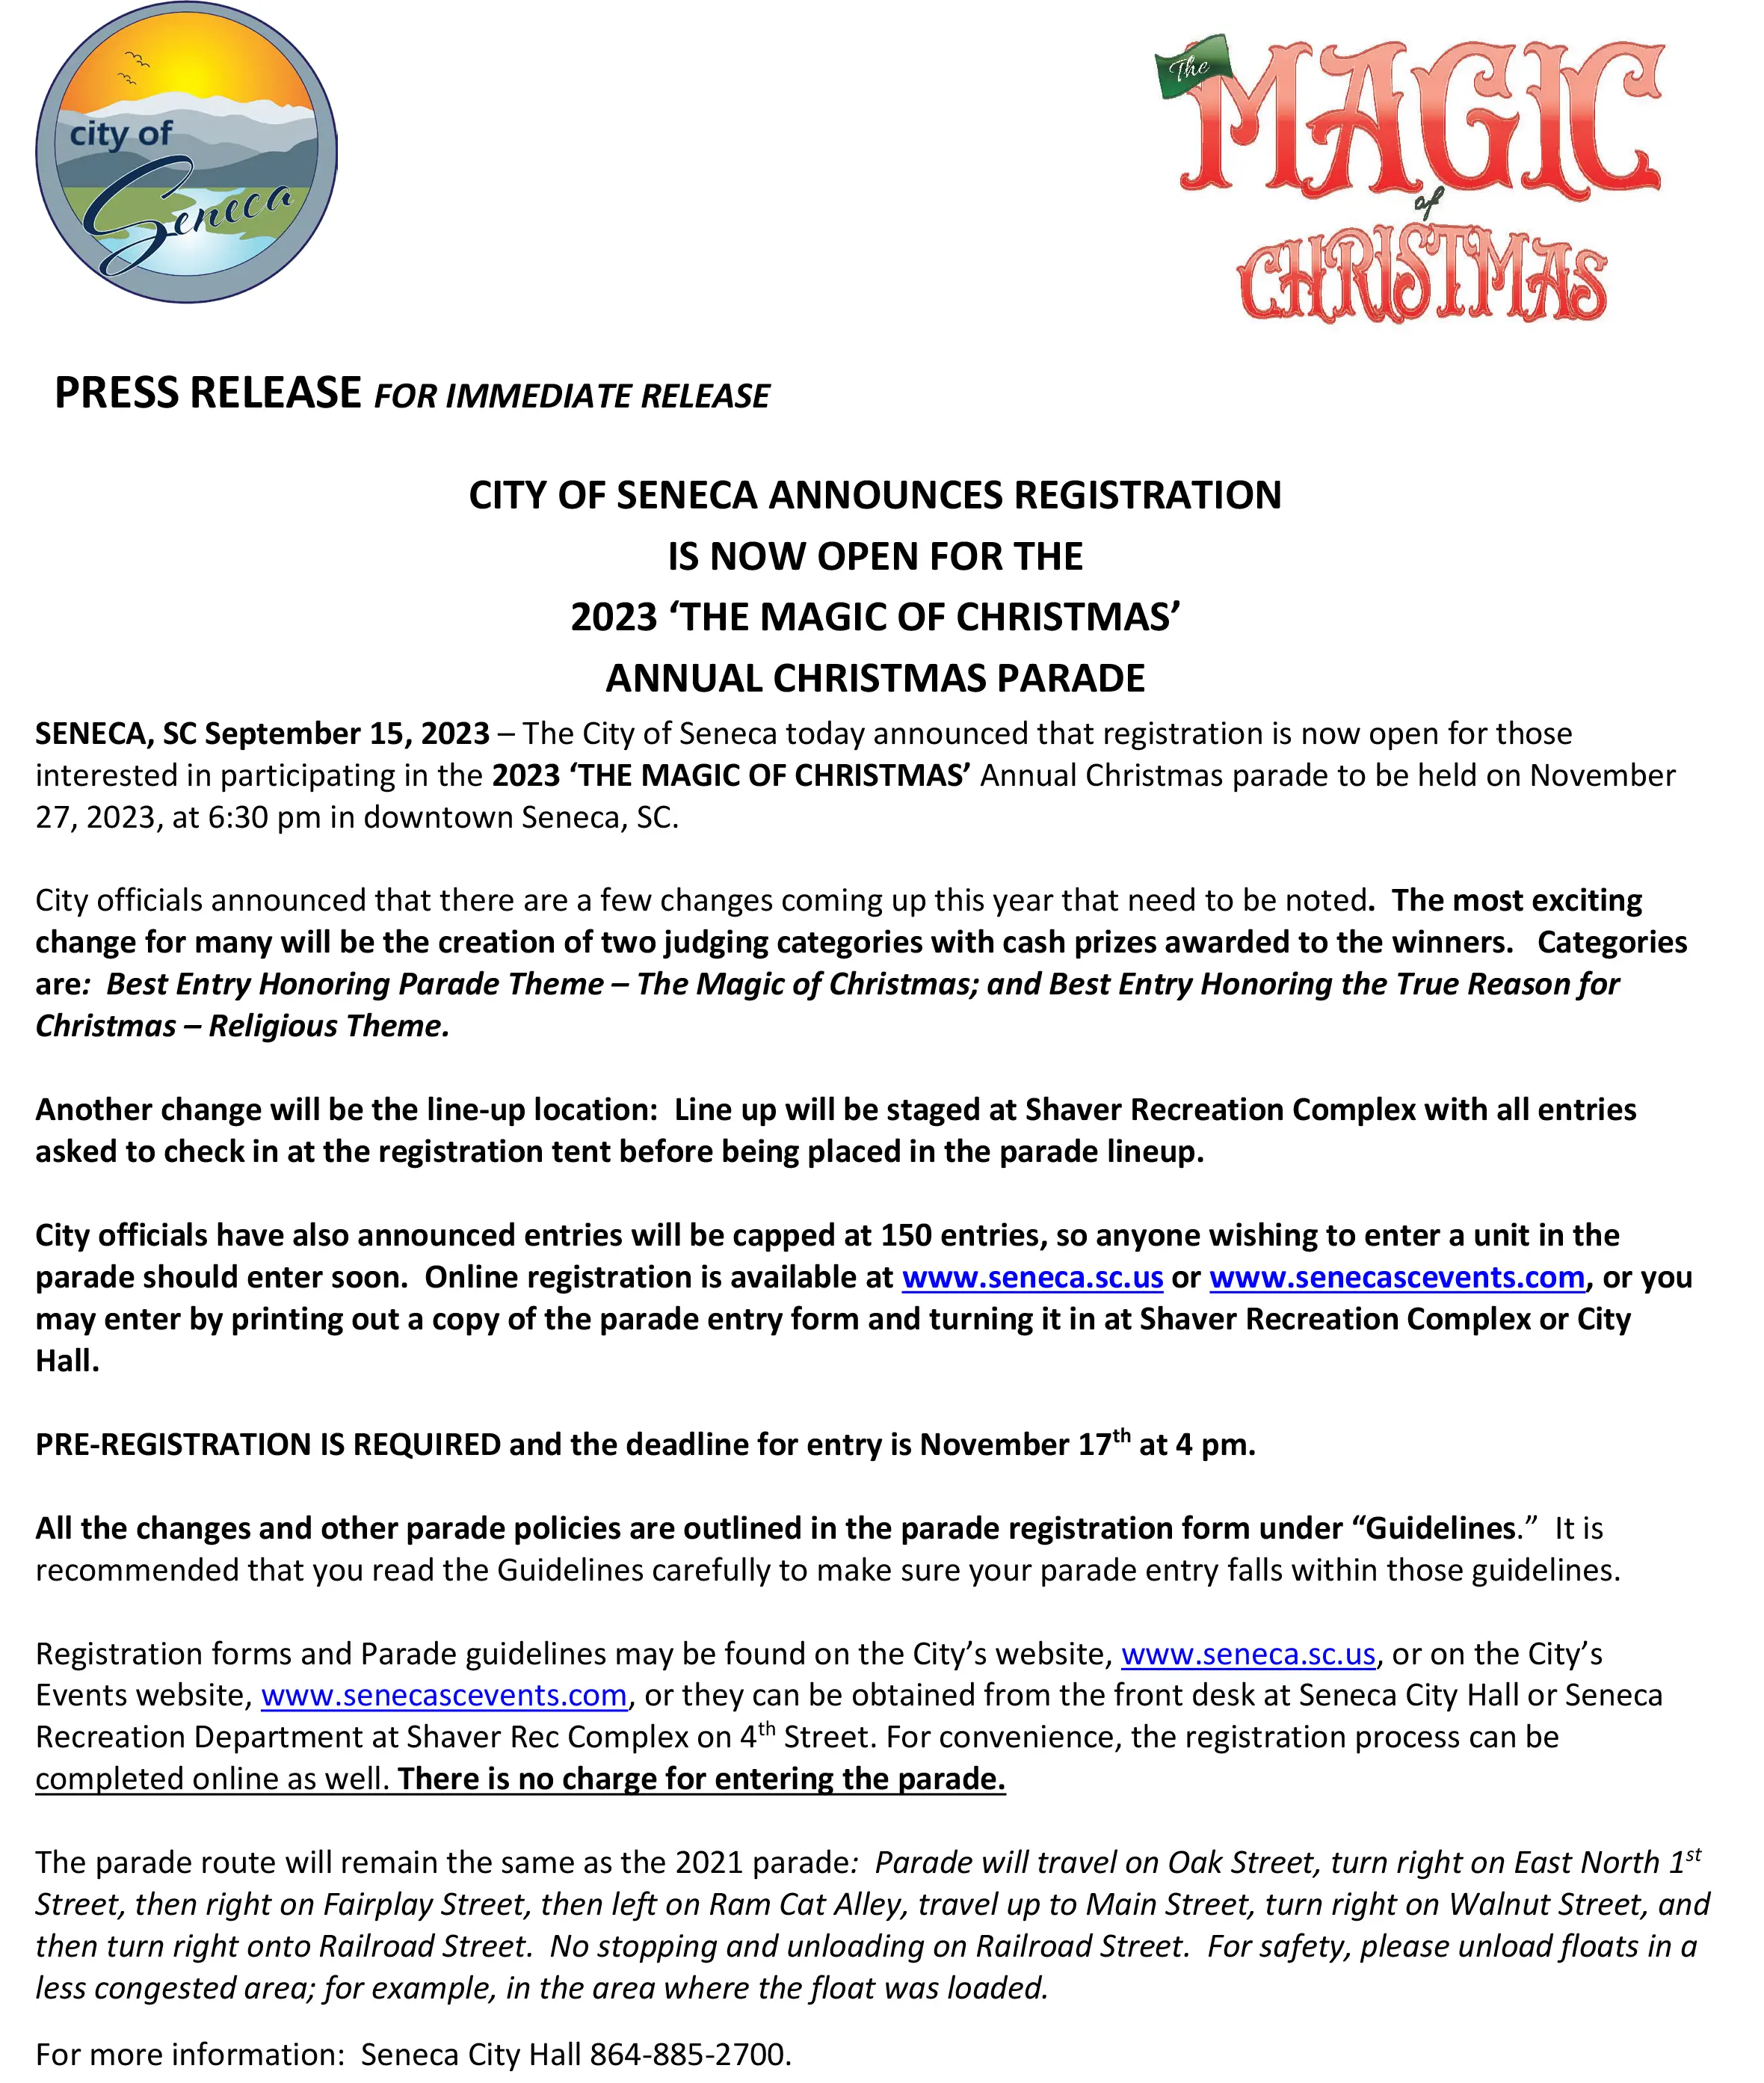 press-release-registration-open-for-2023-annual-christmas-parade